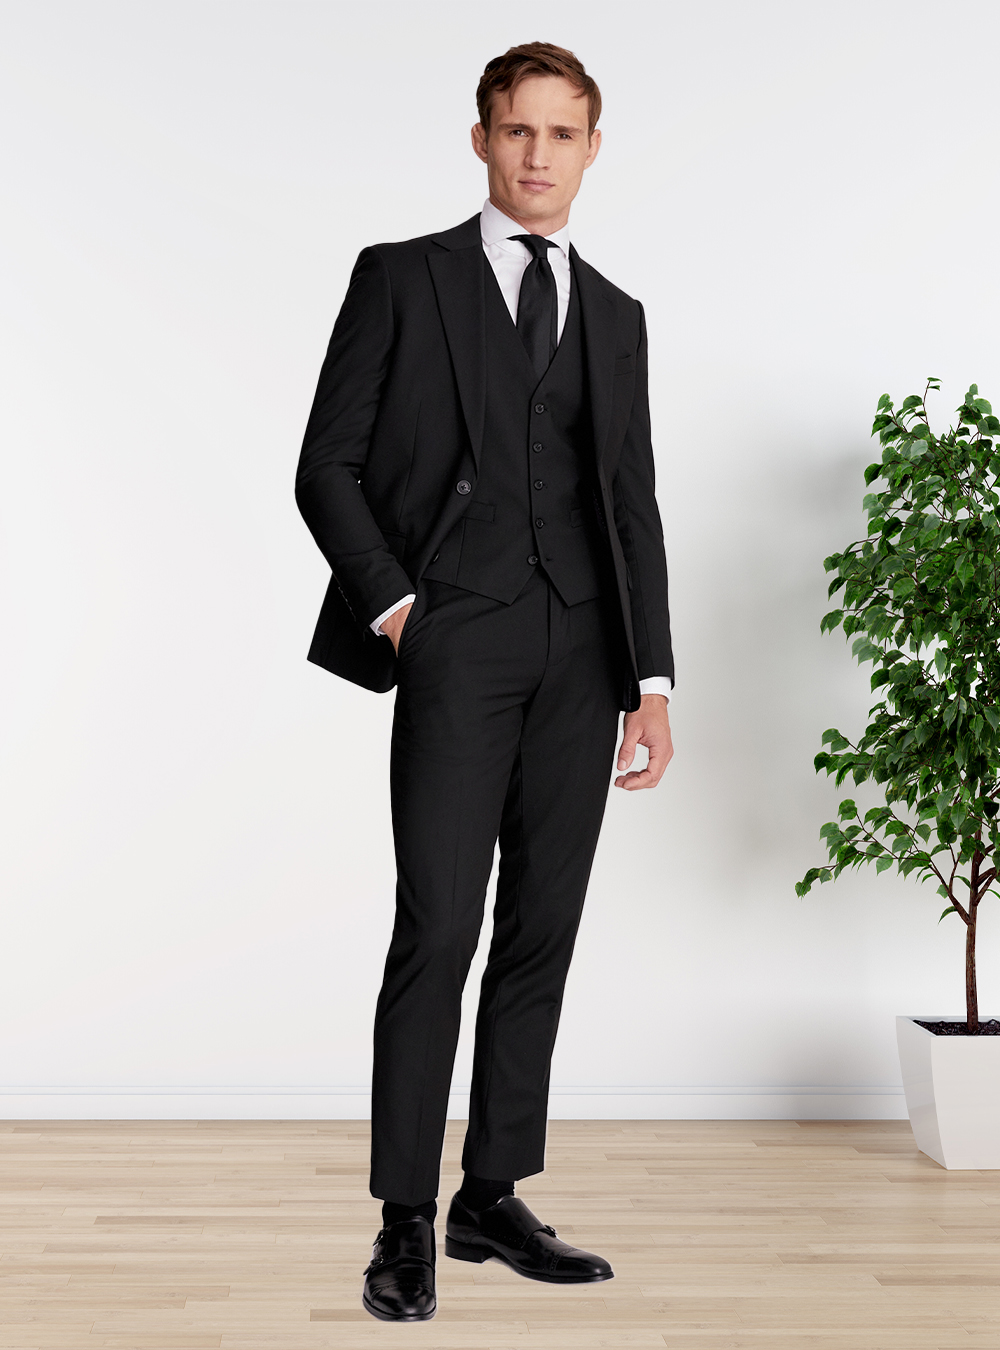 black three-piece suit, white shirt, and a black tie